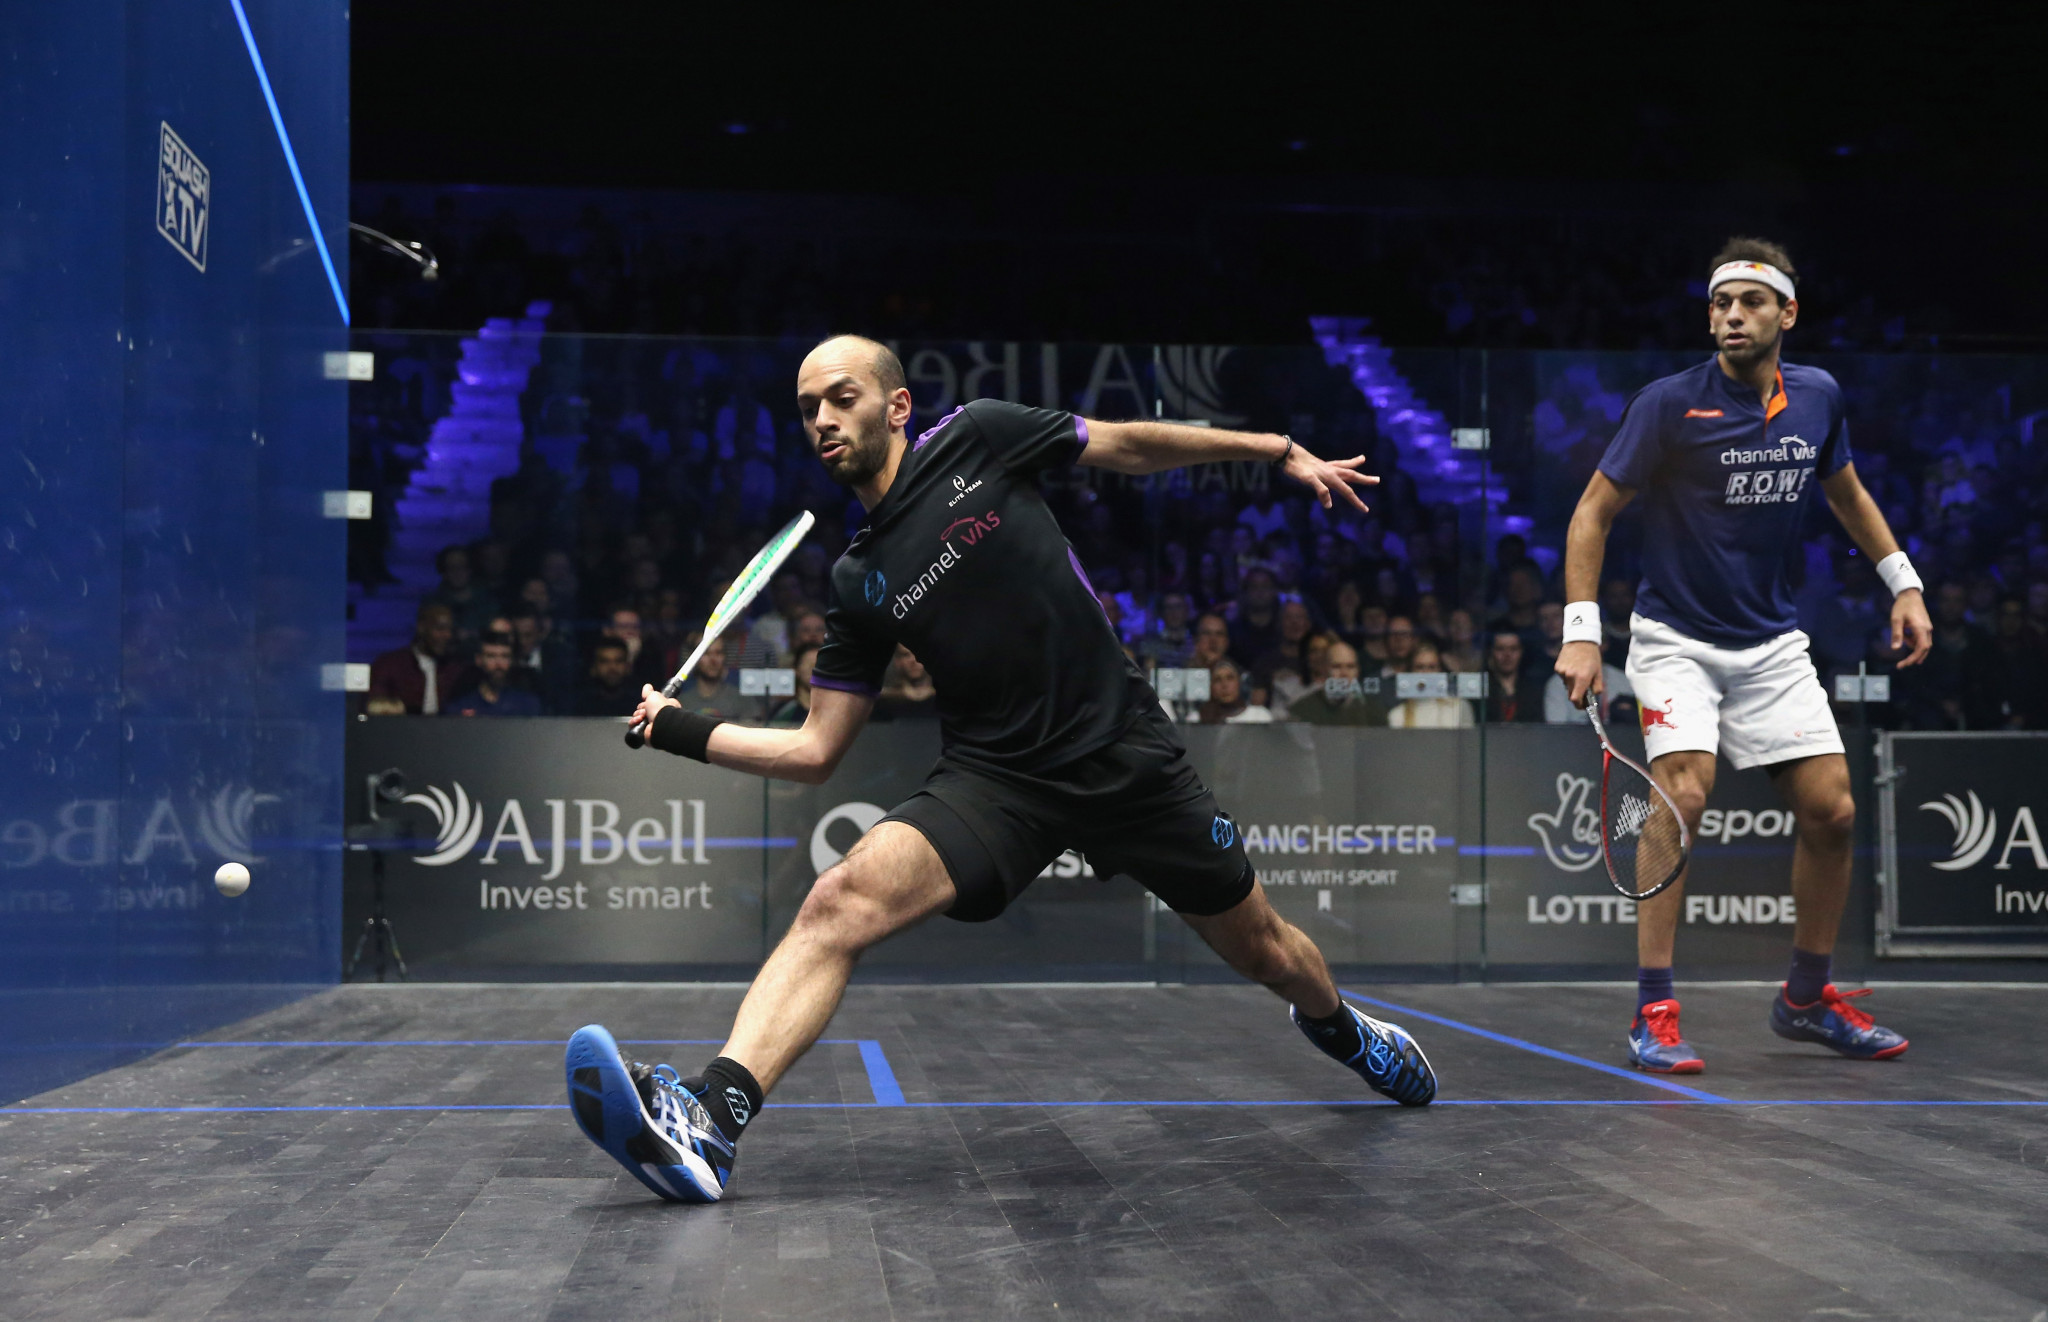 Egyptian squash player Marwan Elshorbagy cleared after anti-doping investigation